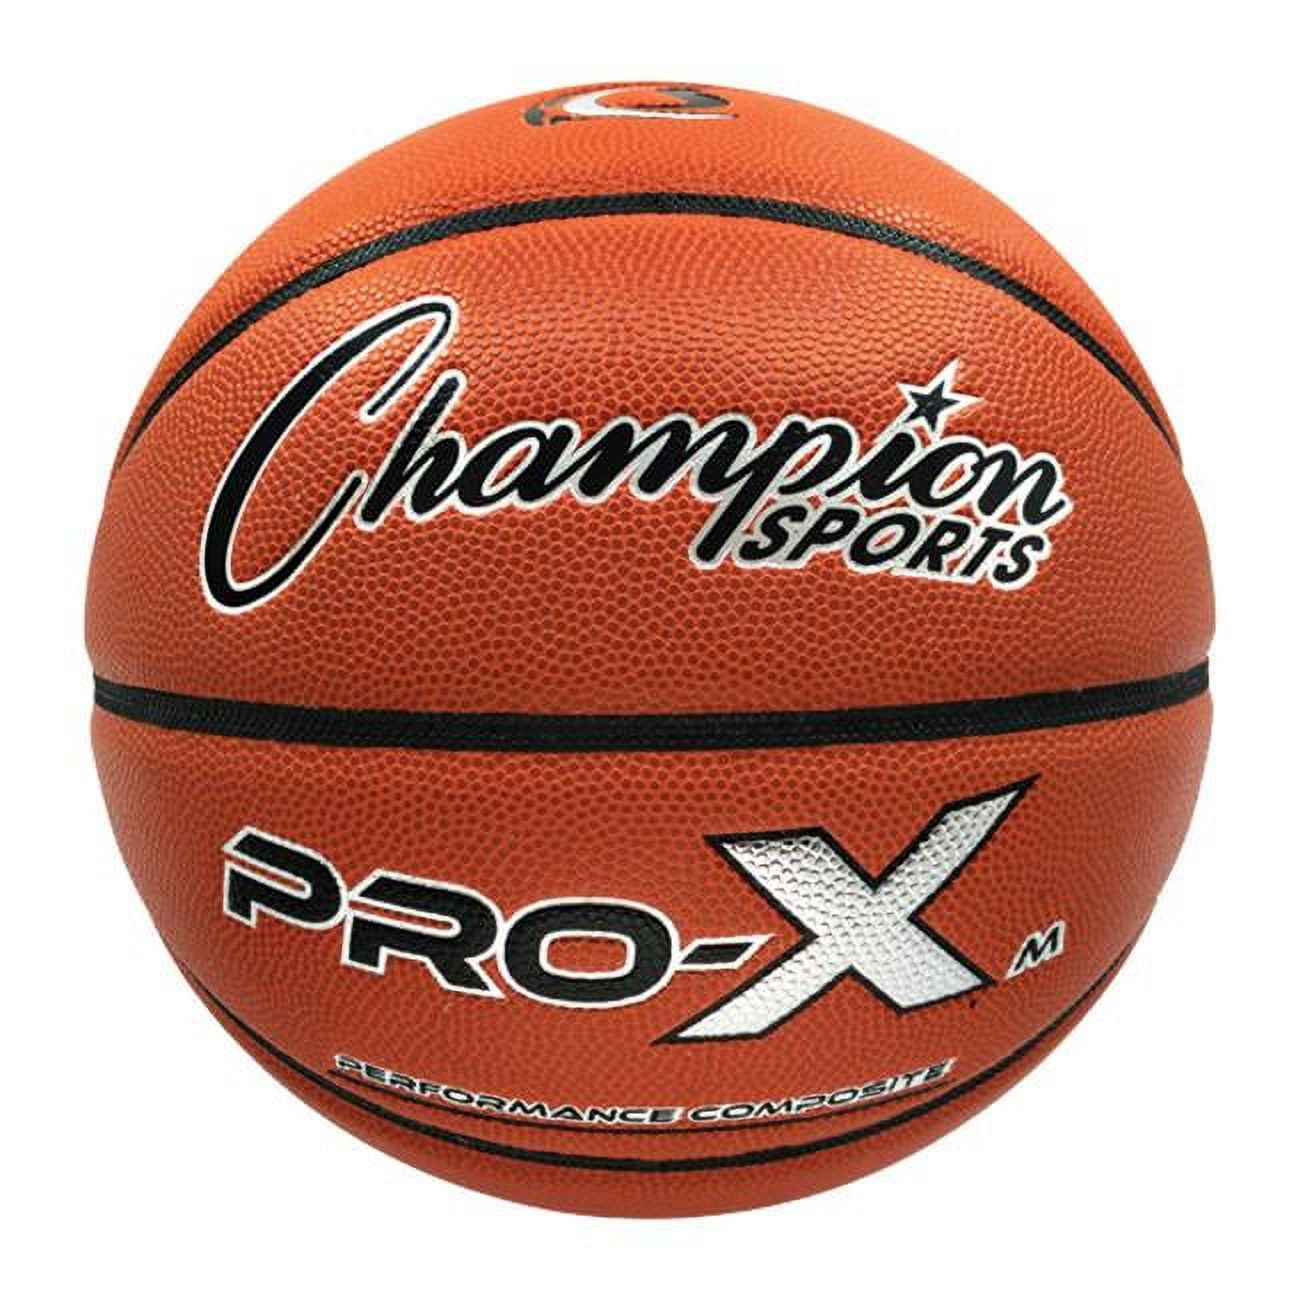 Picture of Champion Sports PROXM 9.8 x 9.8 x 9.8 in. Prox Men Basketball